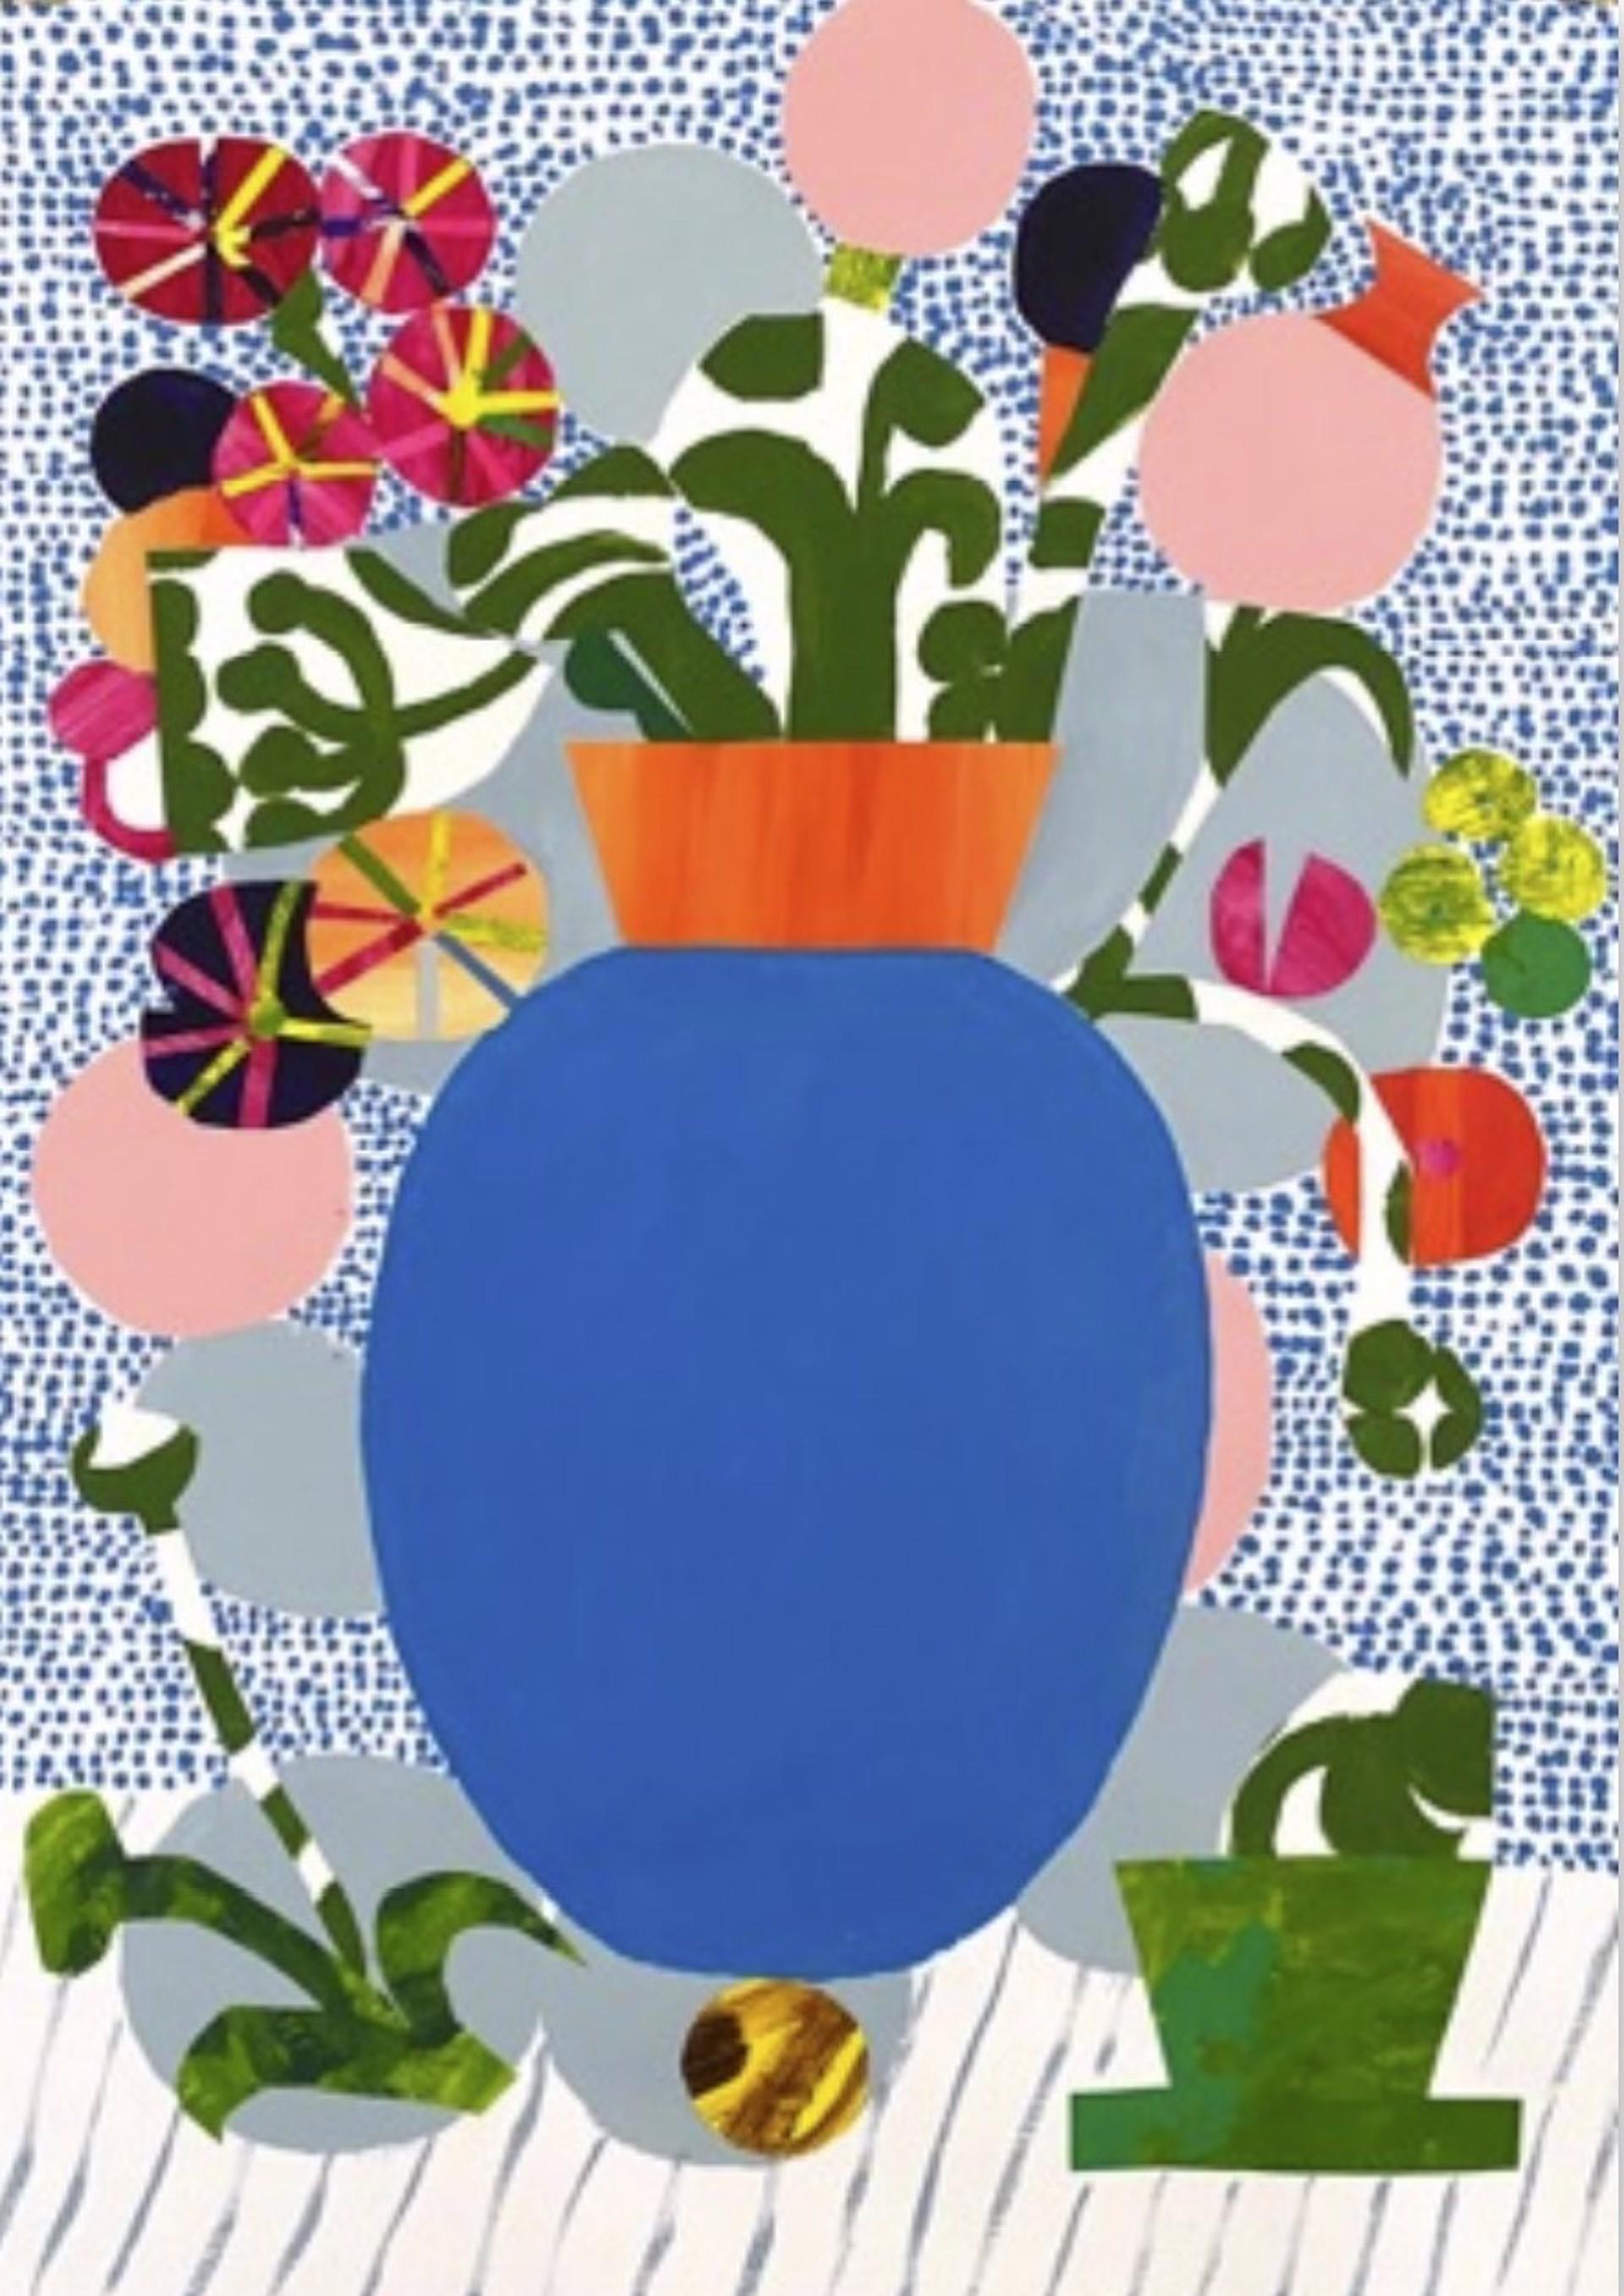 Maria Lundstrom Still-Life Painting - Vase & Flowers I, acrylic on paper, botanicals, florals, color, abstract shapes